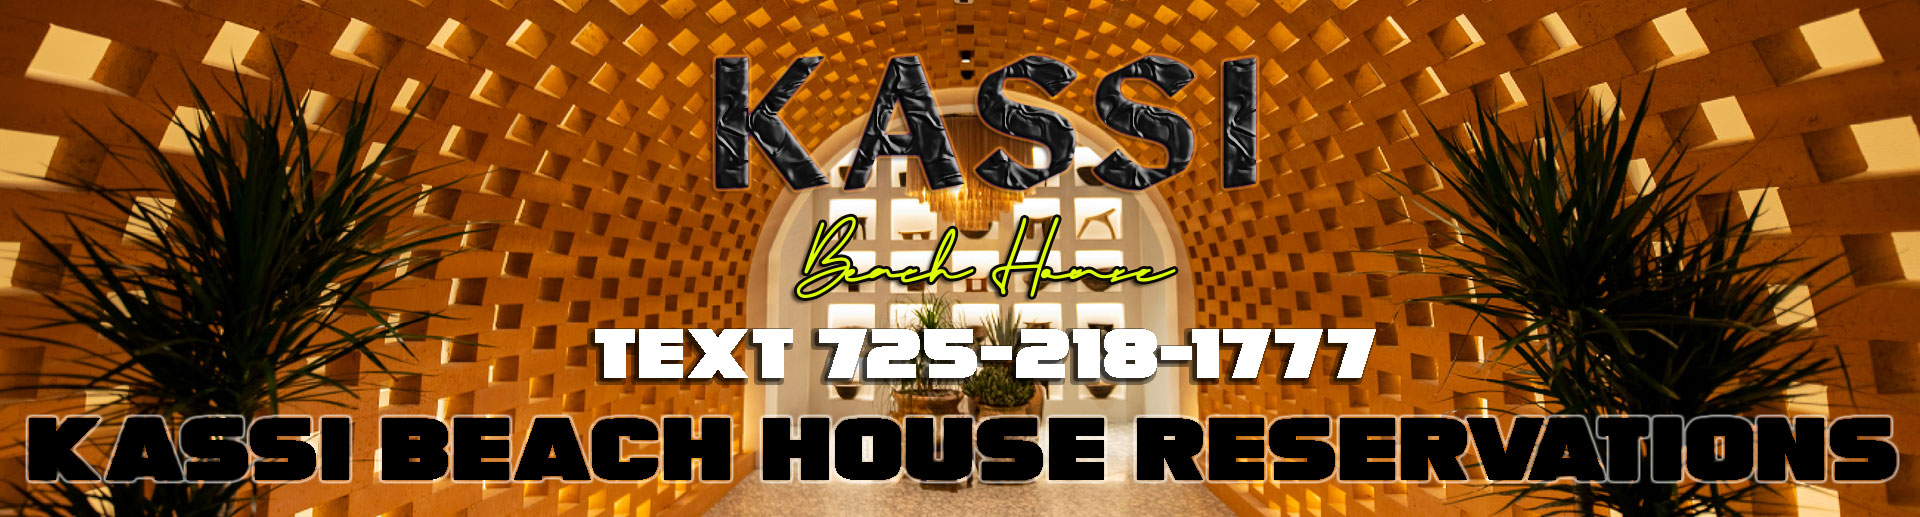 Kassi Beach House Reservations